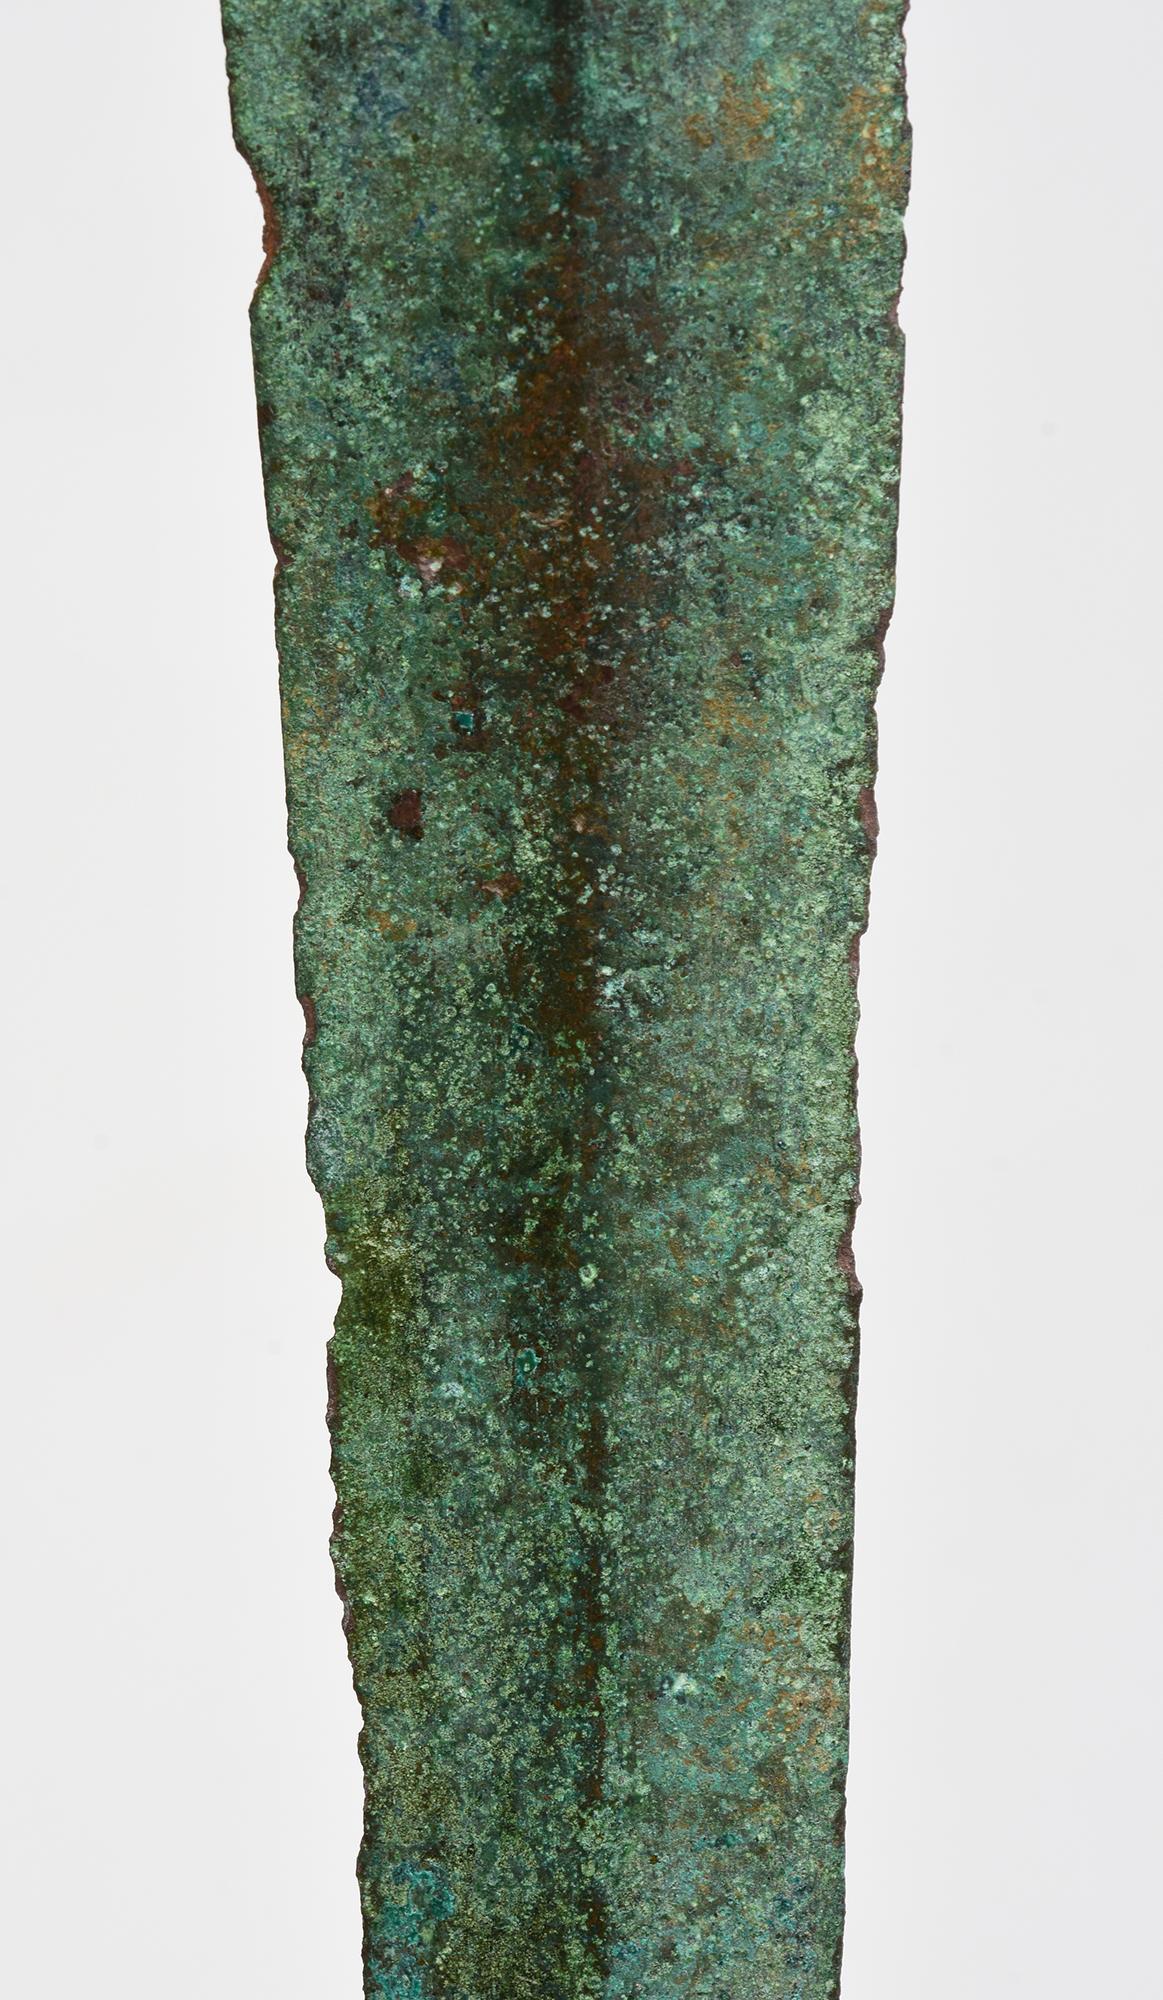 Ancient Antique Luristan Bronze Short Sword / Knife / Early Iron Age Weapon In Good Condition For Sale In Sampantawong, TH